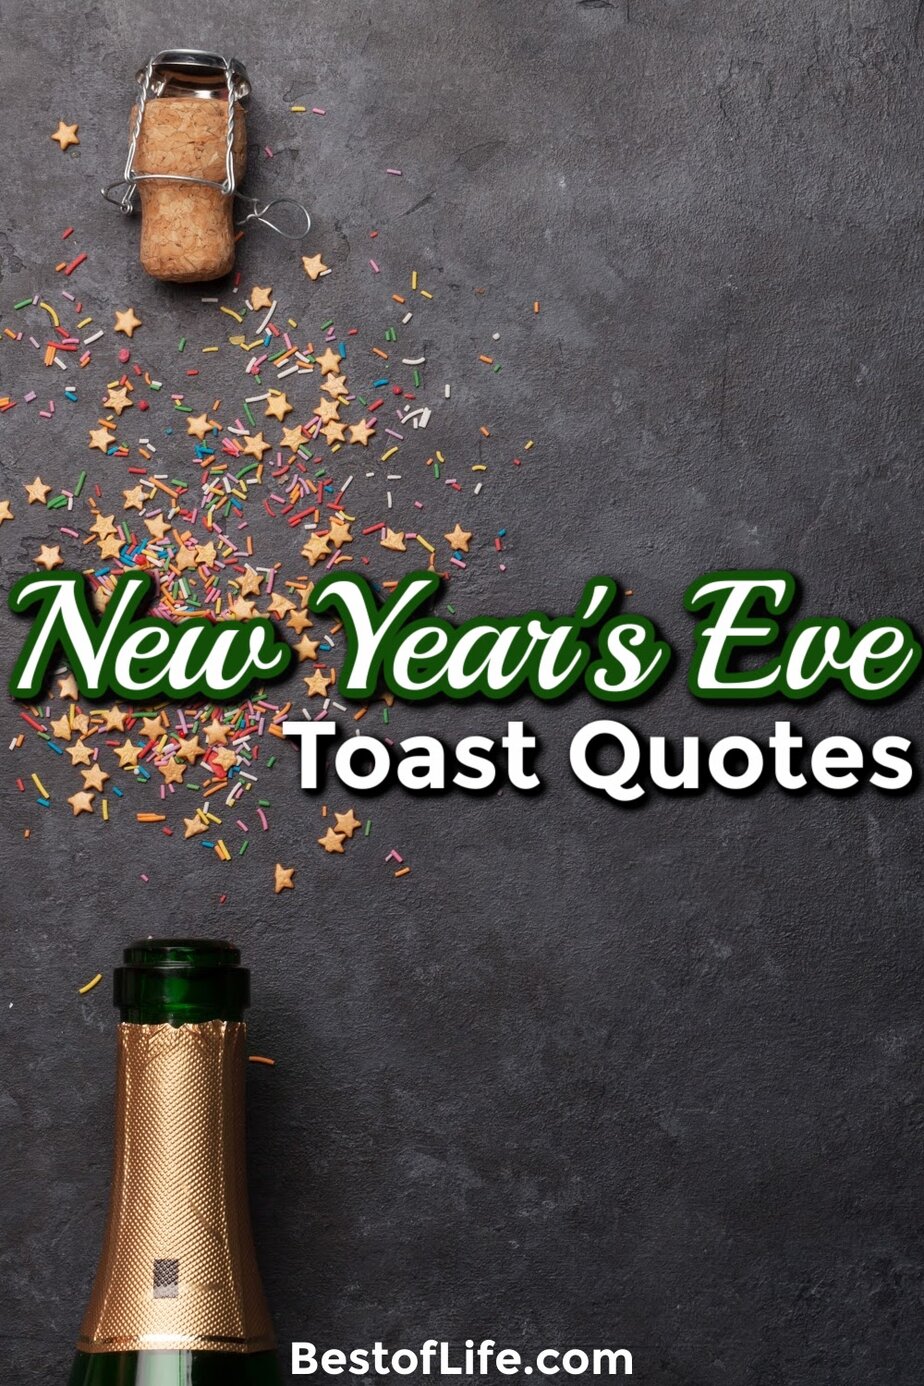 Welcome in the New Year with some New Year’s Eve toast quotes to make your countdown to the new year even more meaningful for those around you. New Year's Eve Quotes | Toasts for New Year's Eve | Inspirational Quotes | Party Planning